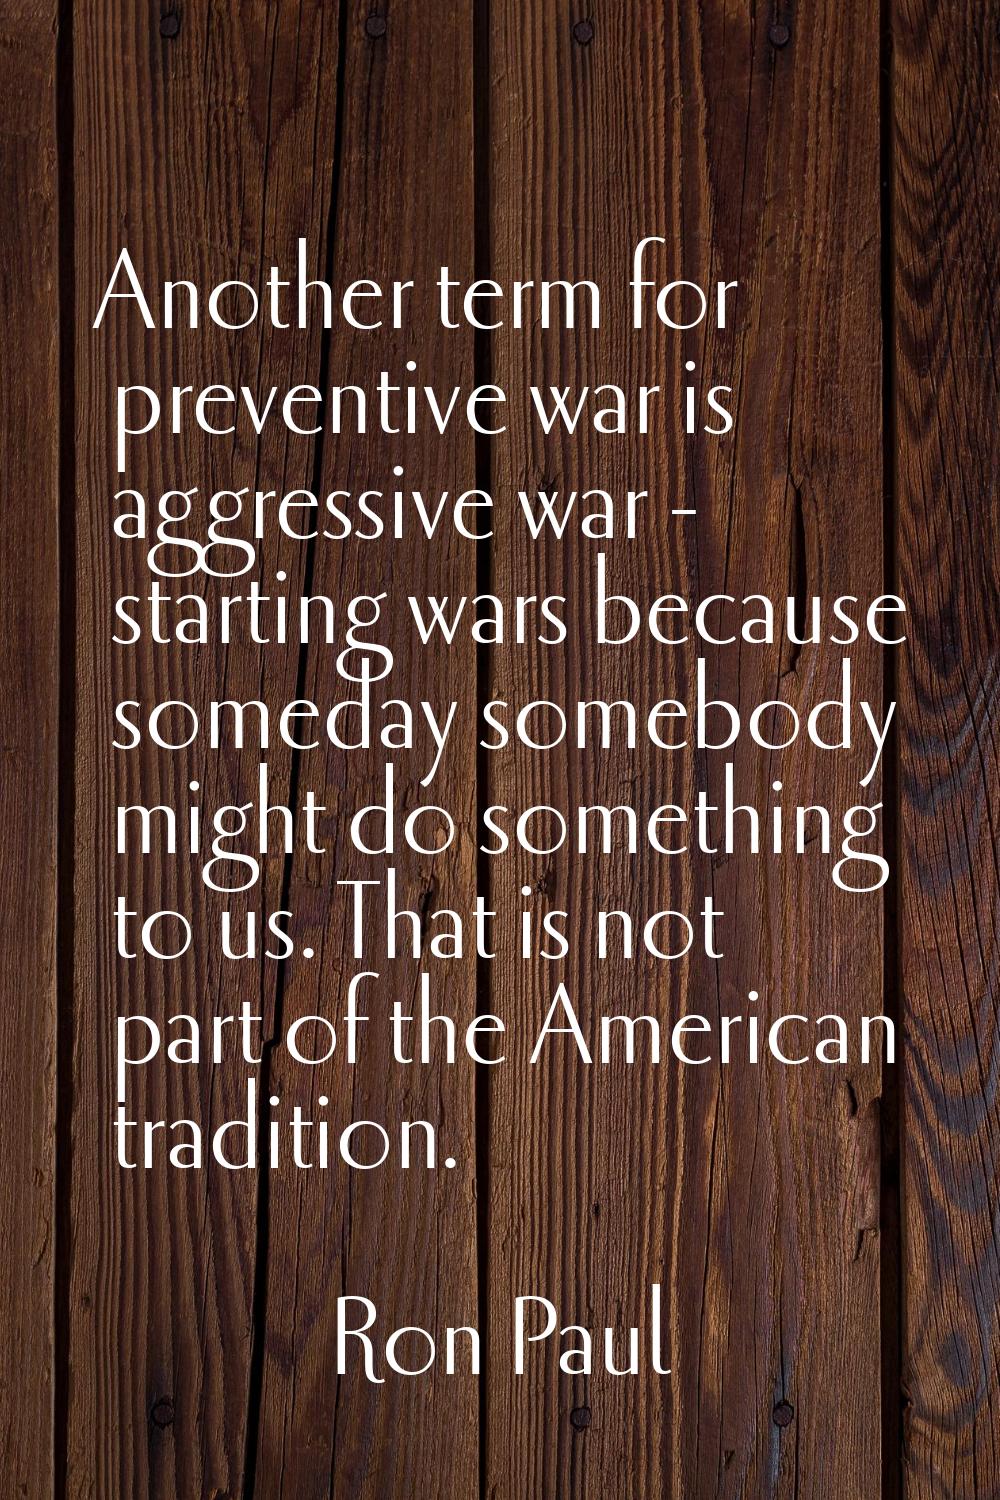 Another term for preventive war is aggressive war - starting wars because someday somebody might do